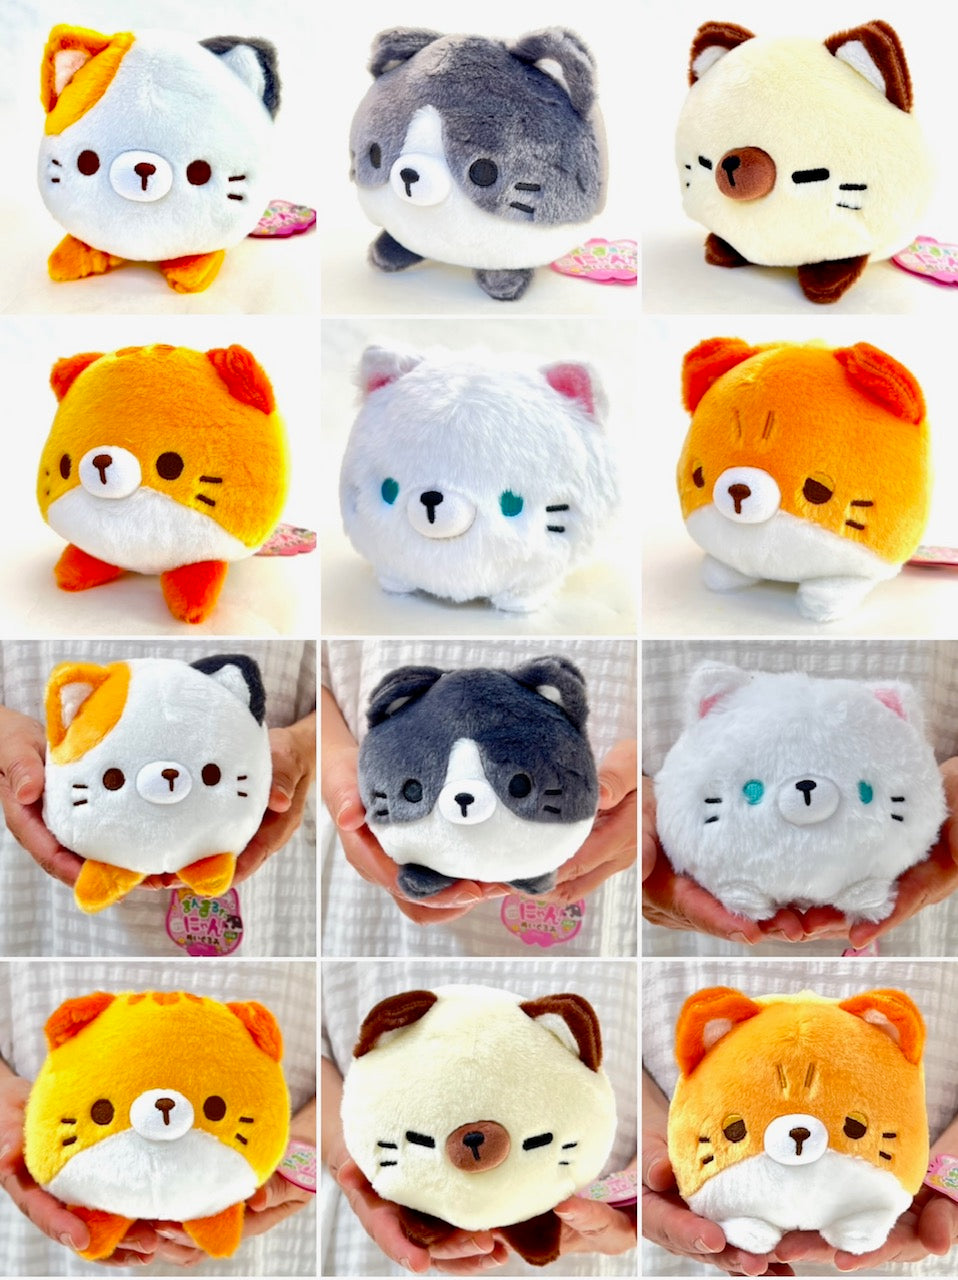 X 63350 ROUND CATS PLUSH-DISCONTINUED